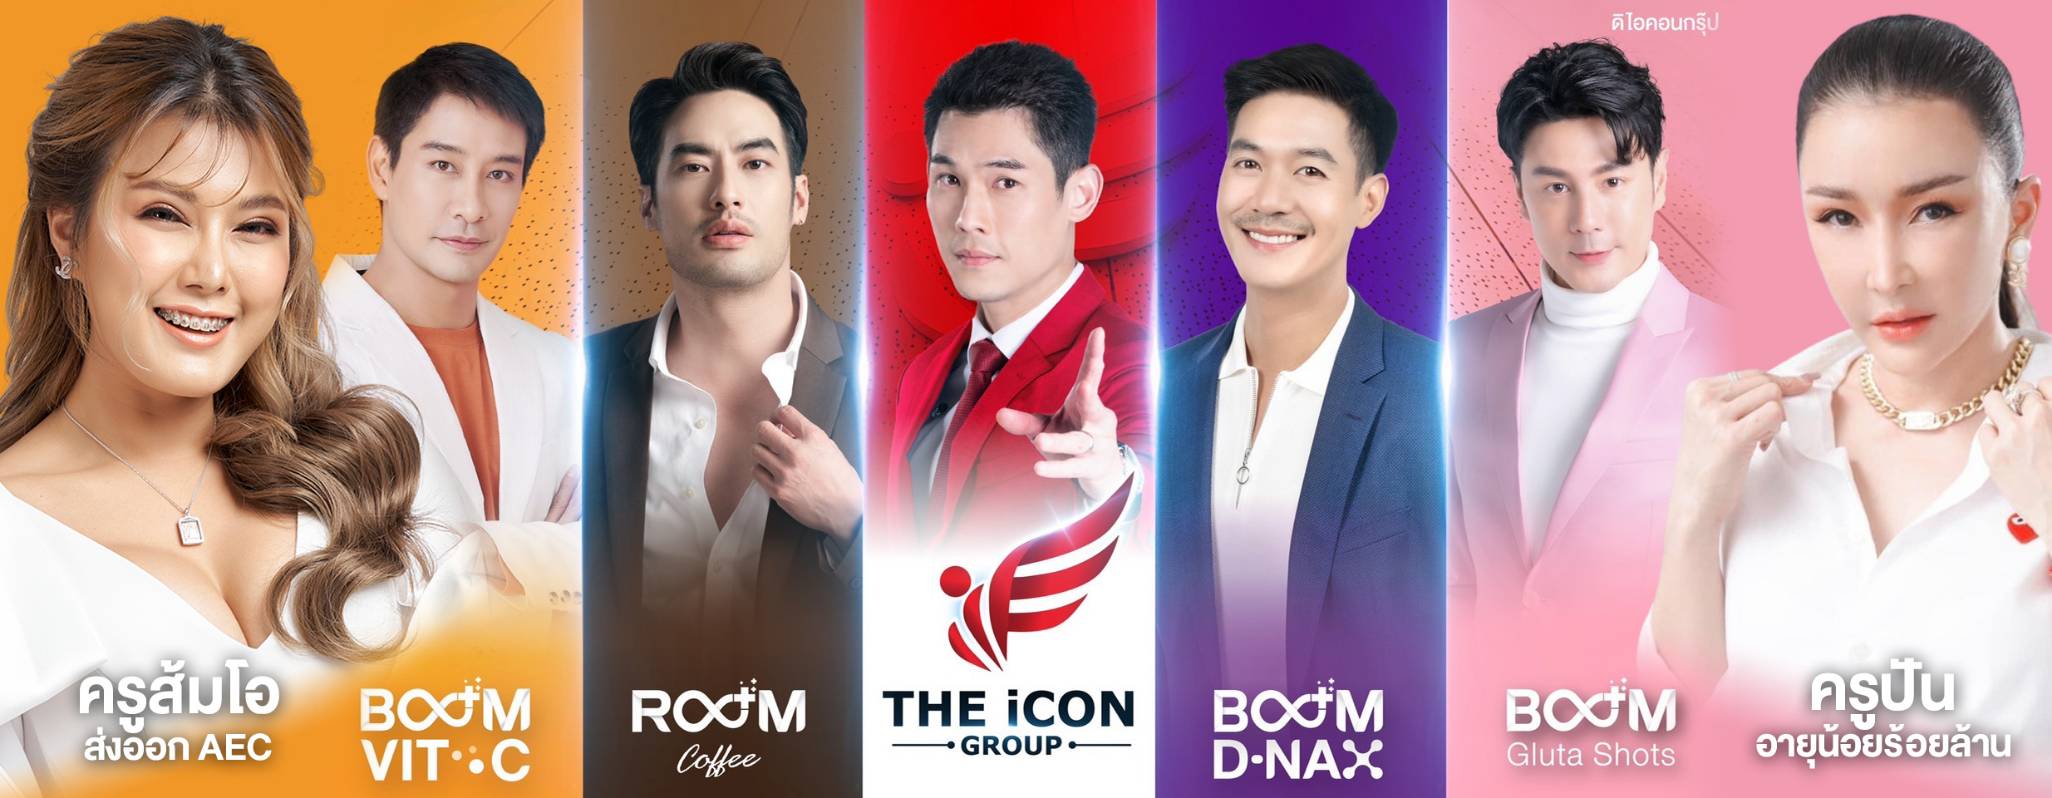 THE ICON GROUP